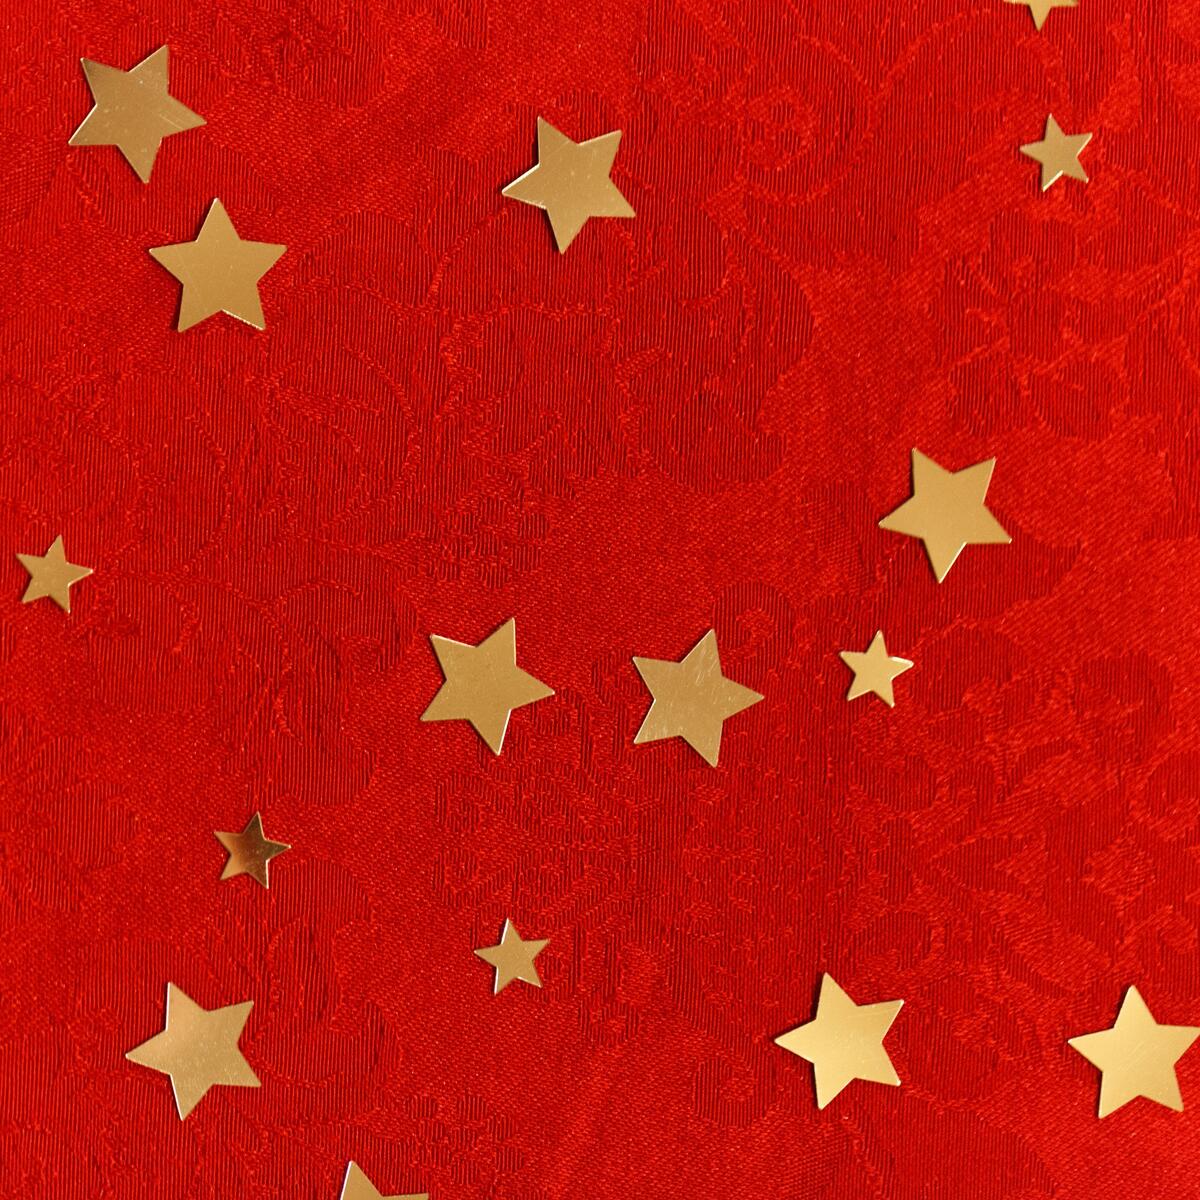 Gold stars on a red background